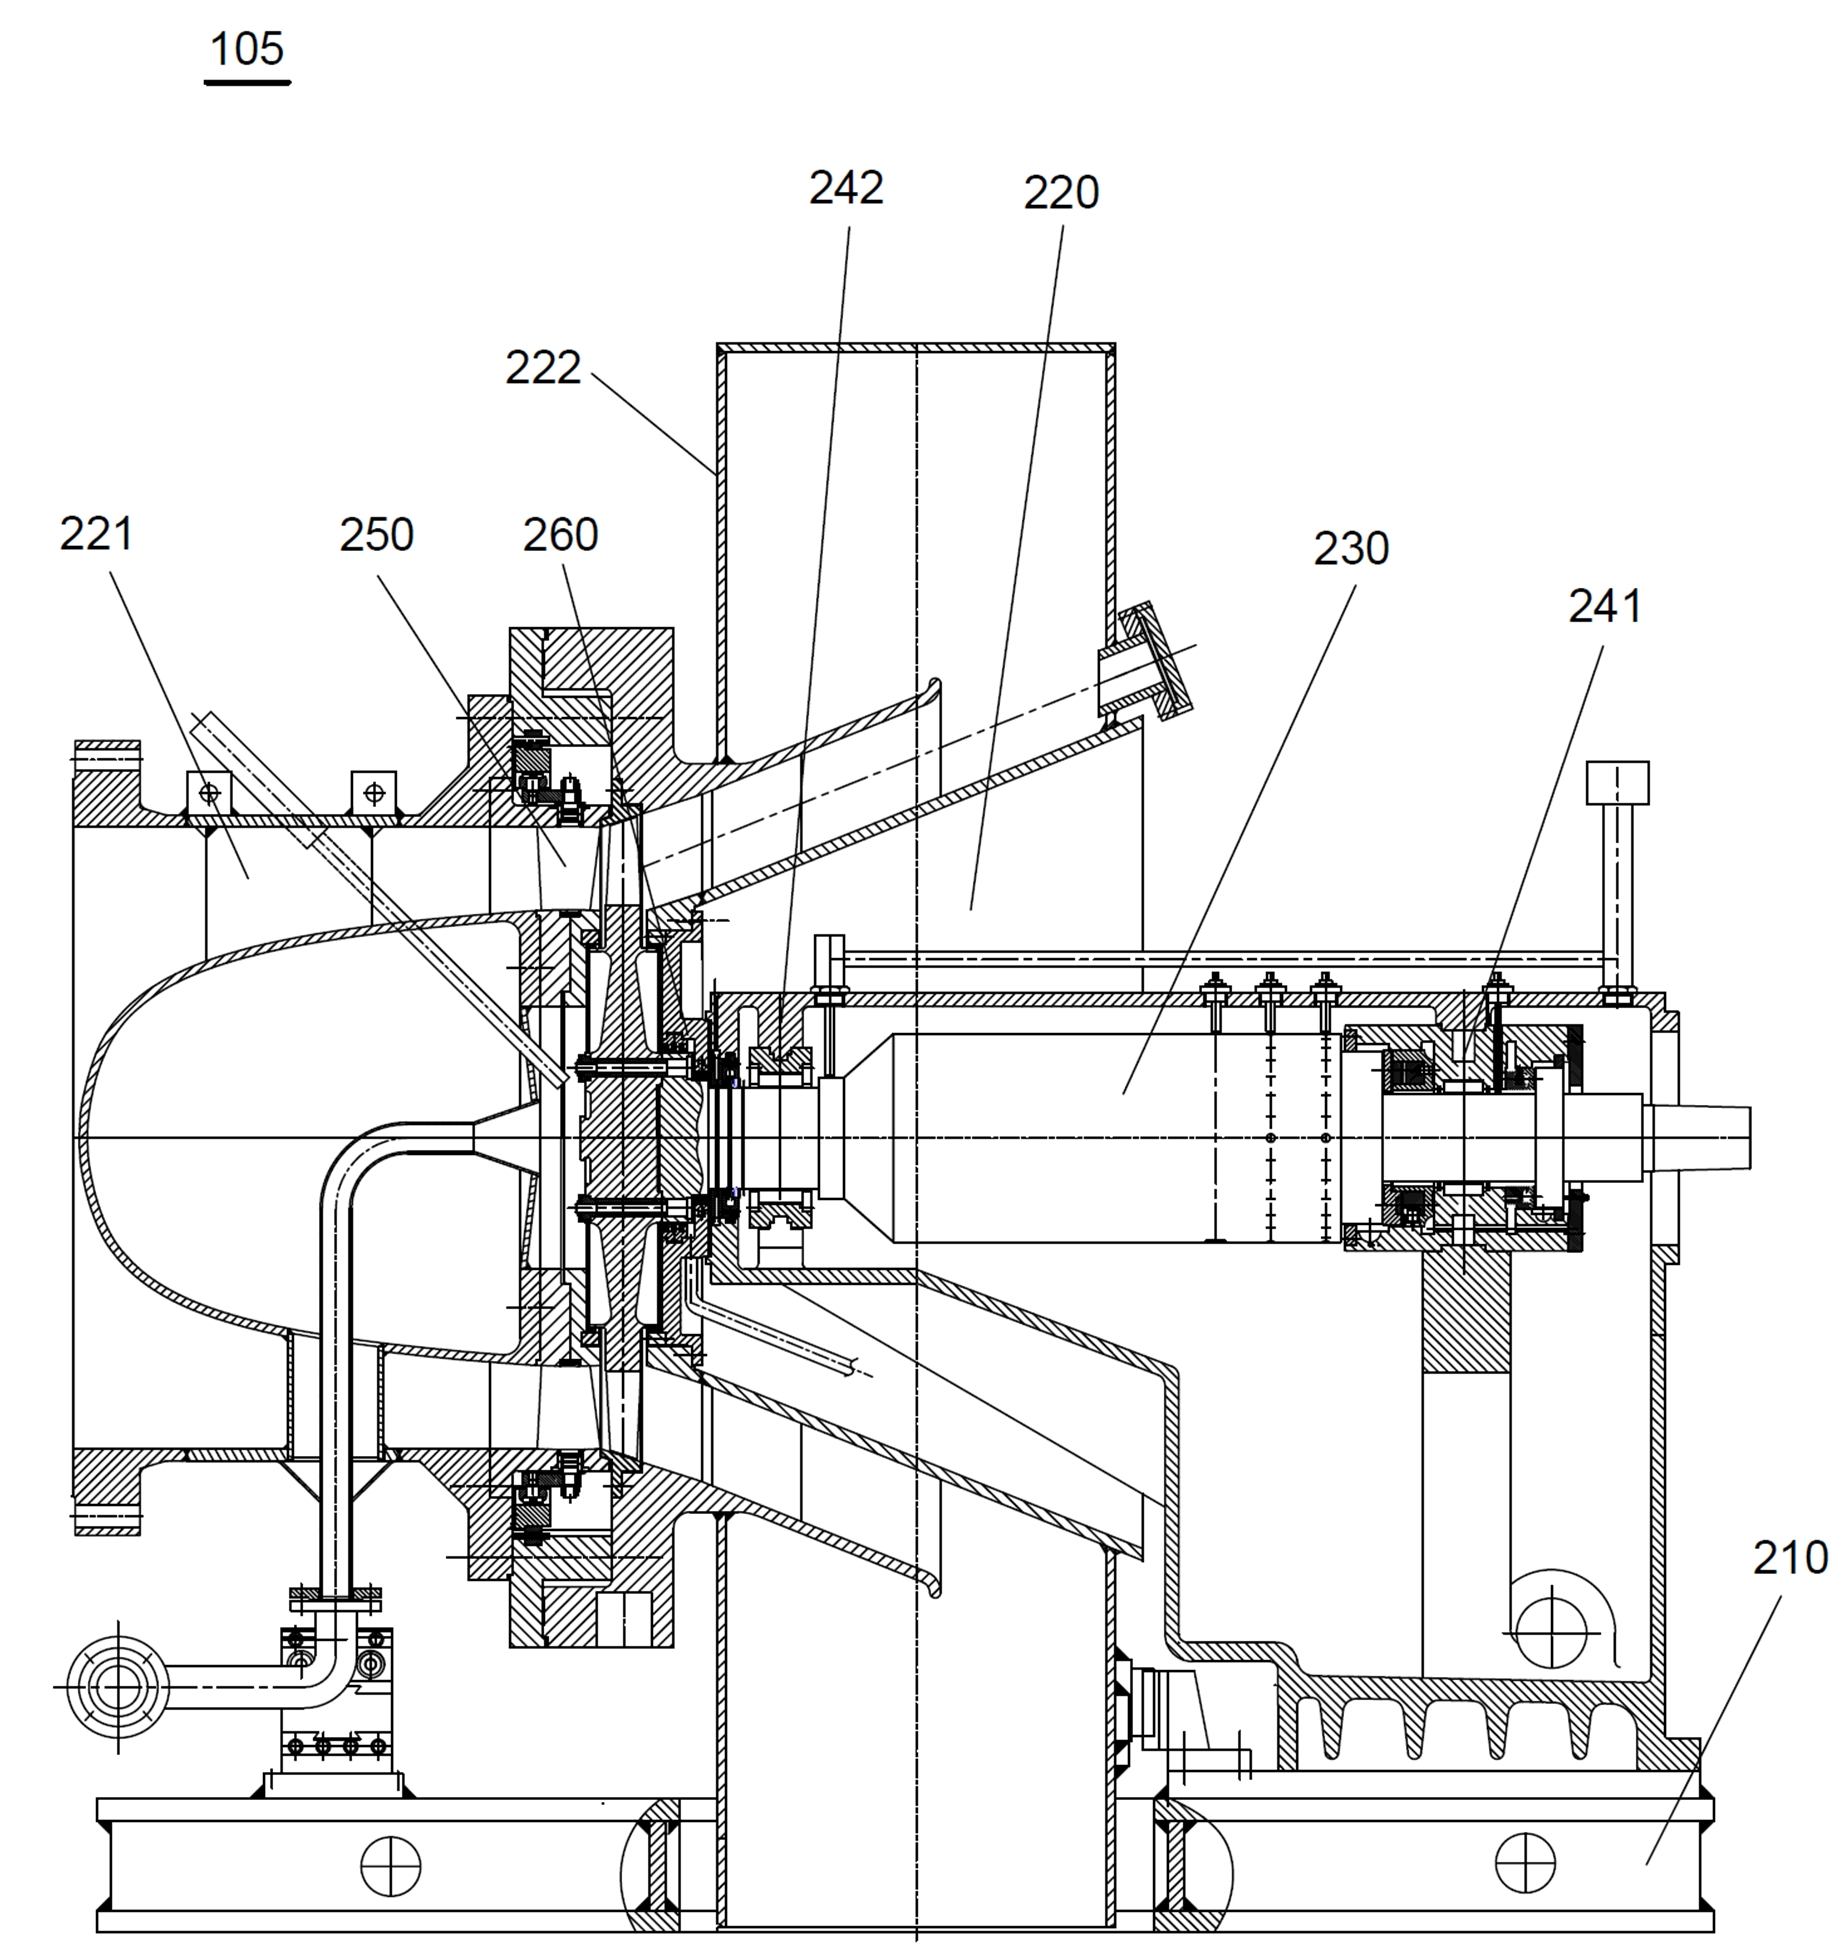 Coaxial constant-speed turbine set for blast furnace